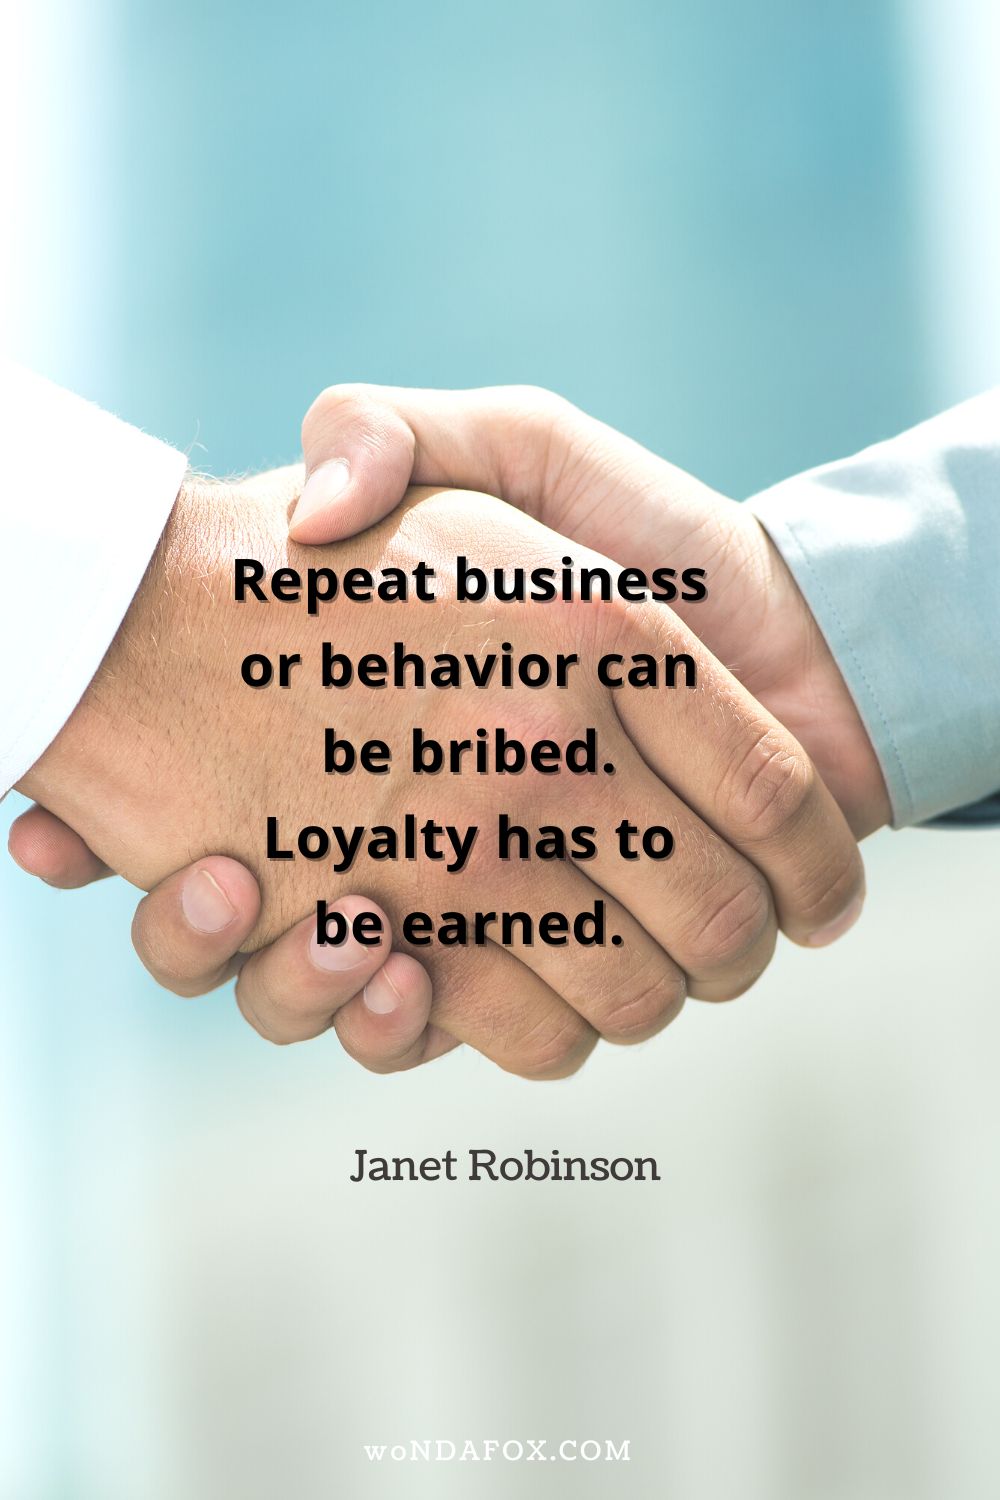 “Repeat business or behavior can be bribed. Loyalty has to be earned.”